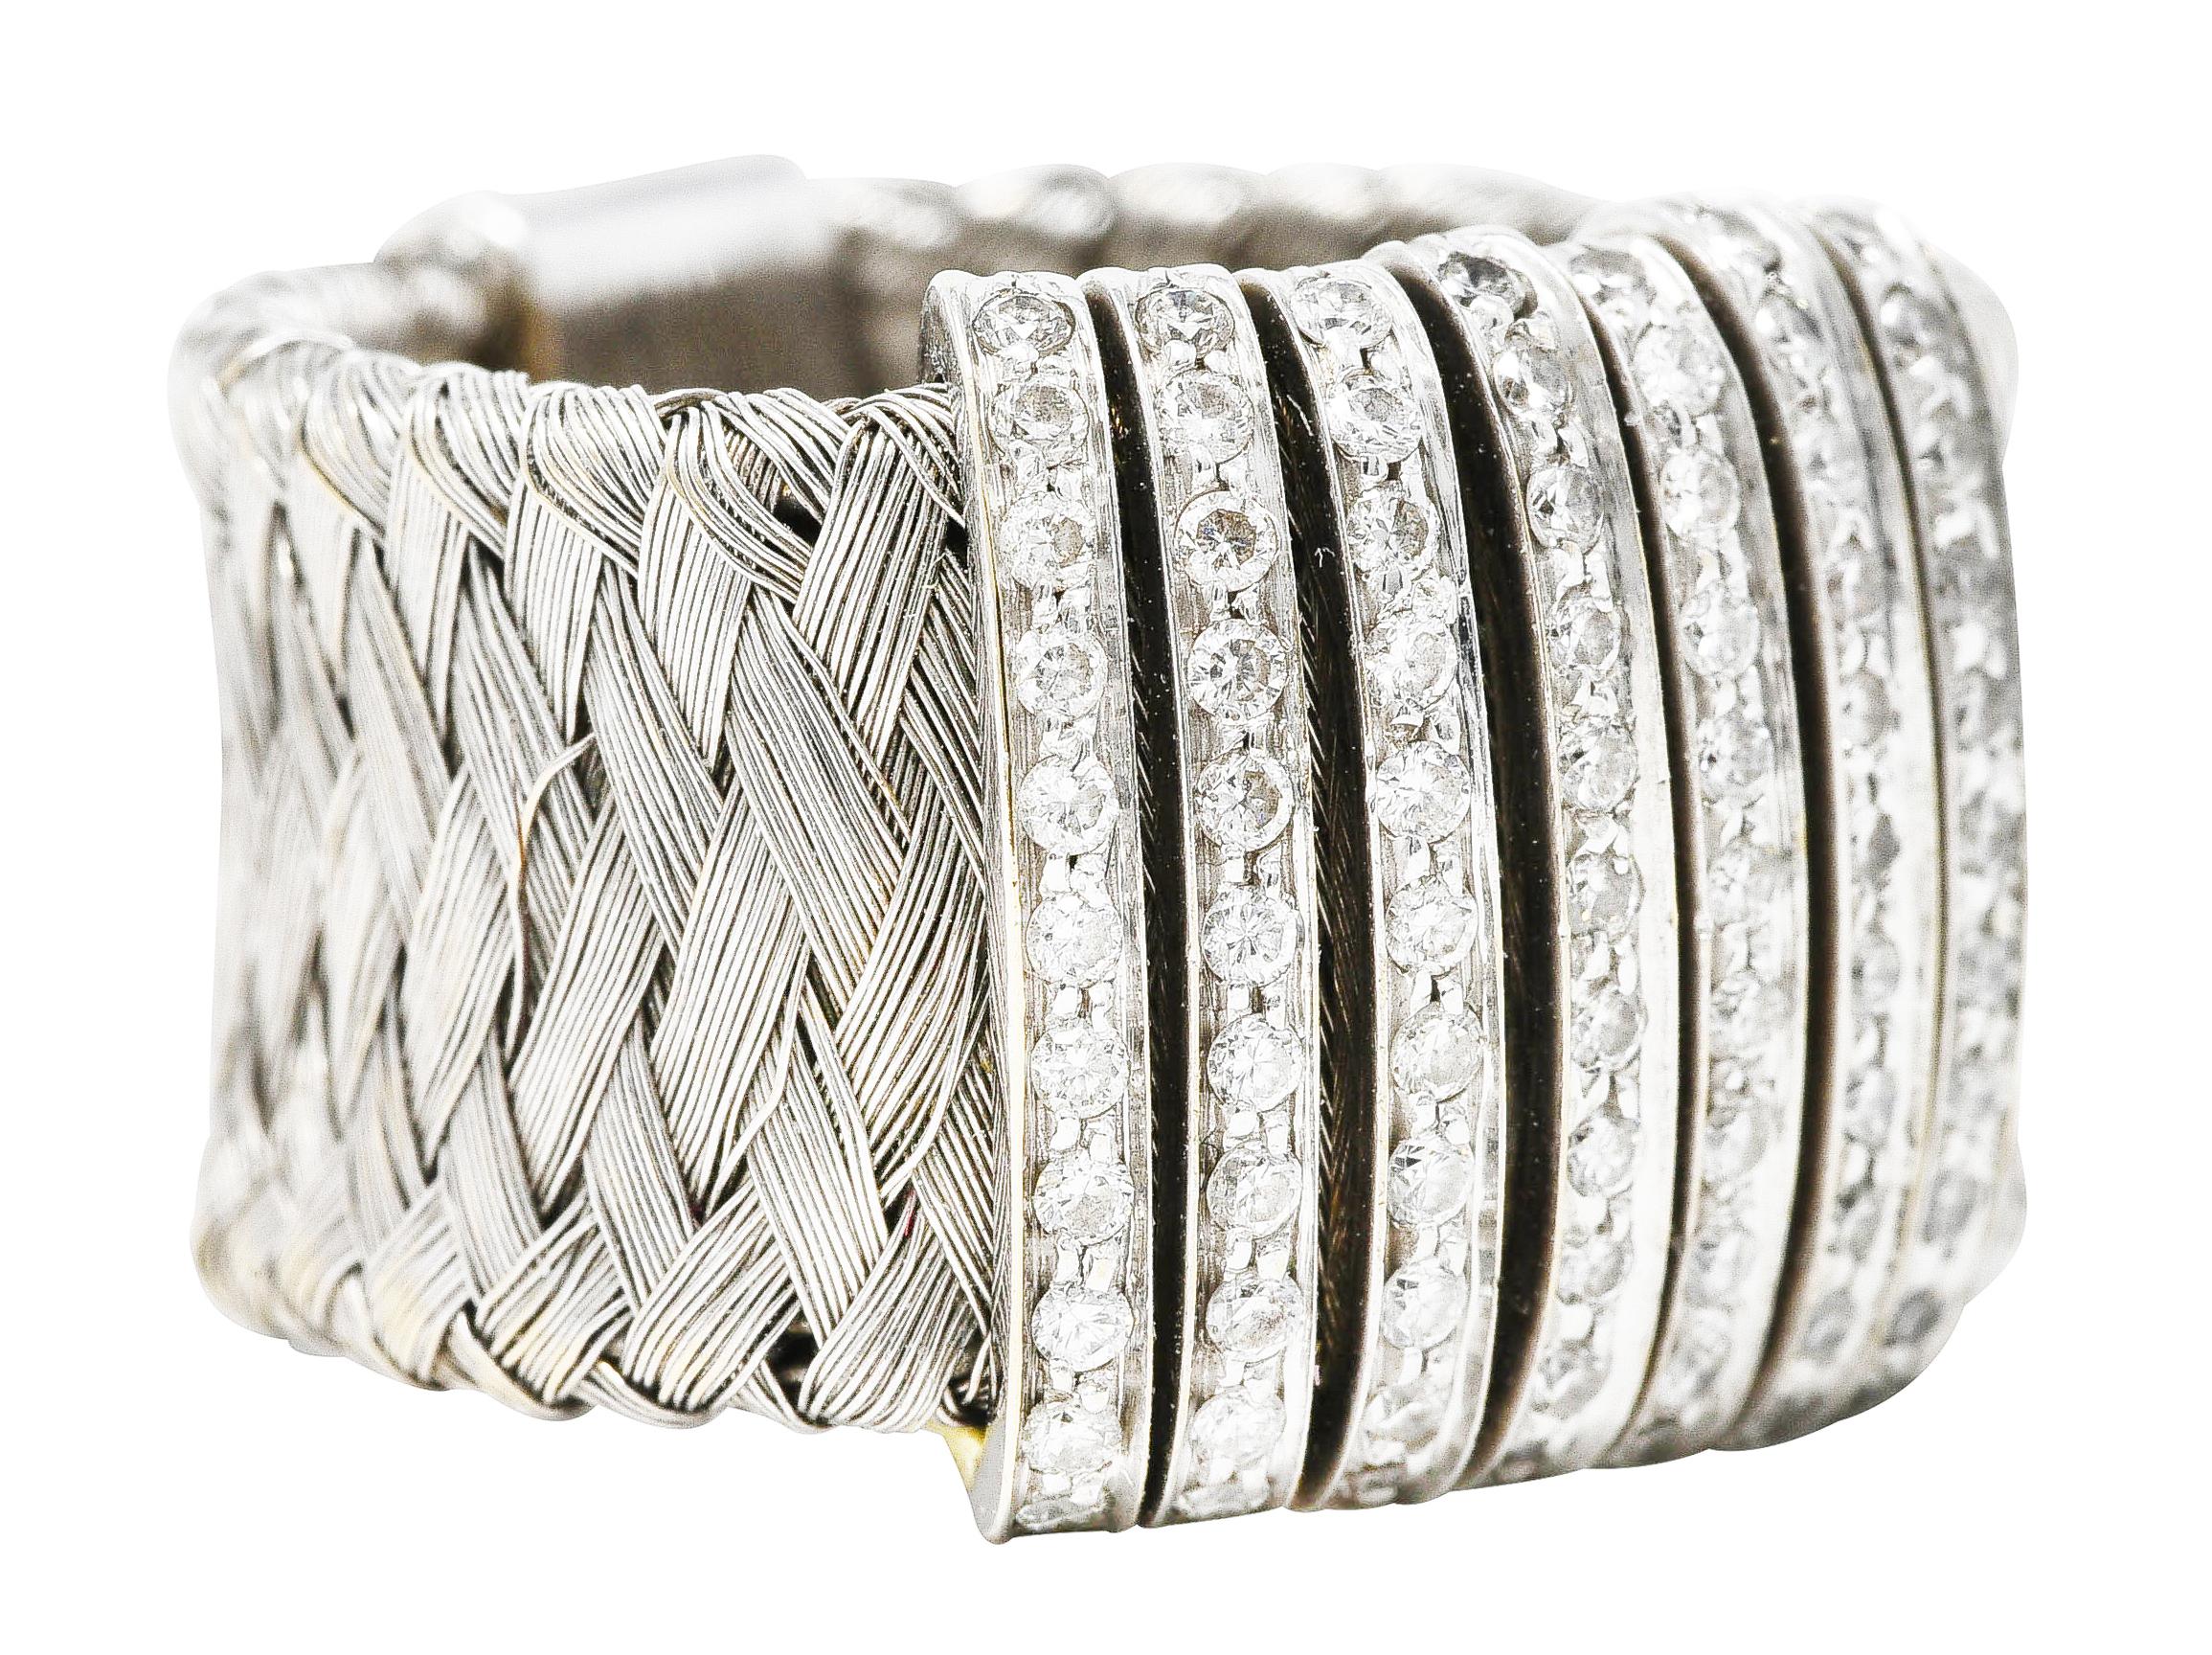 Malleable band ring is comprised of finely woven white gold. Strung with seven bar stations - bead set with round brilliant cut diamonds. Weighing in total approximately 0.80 carat with G/H color and SI clarity. Terminates as a white gold bar at